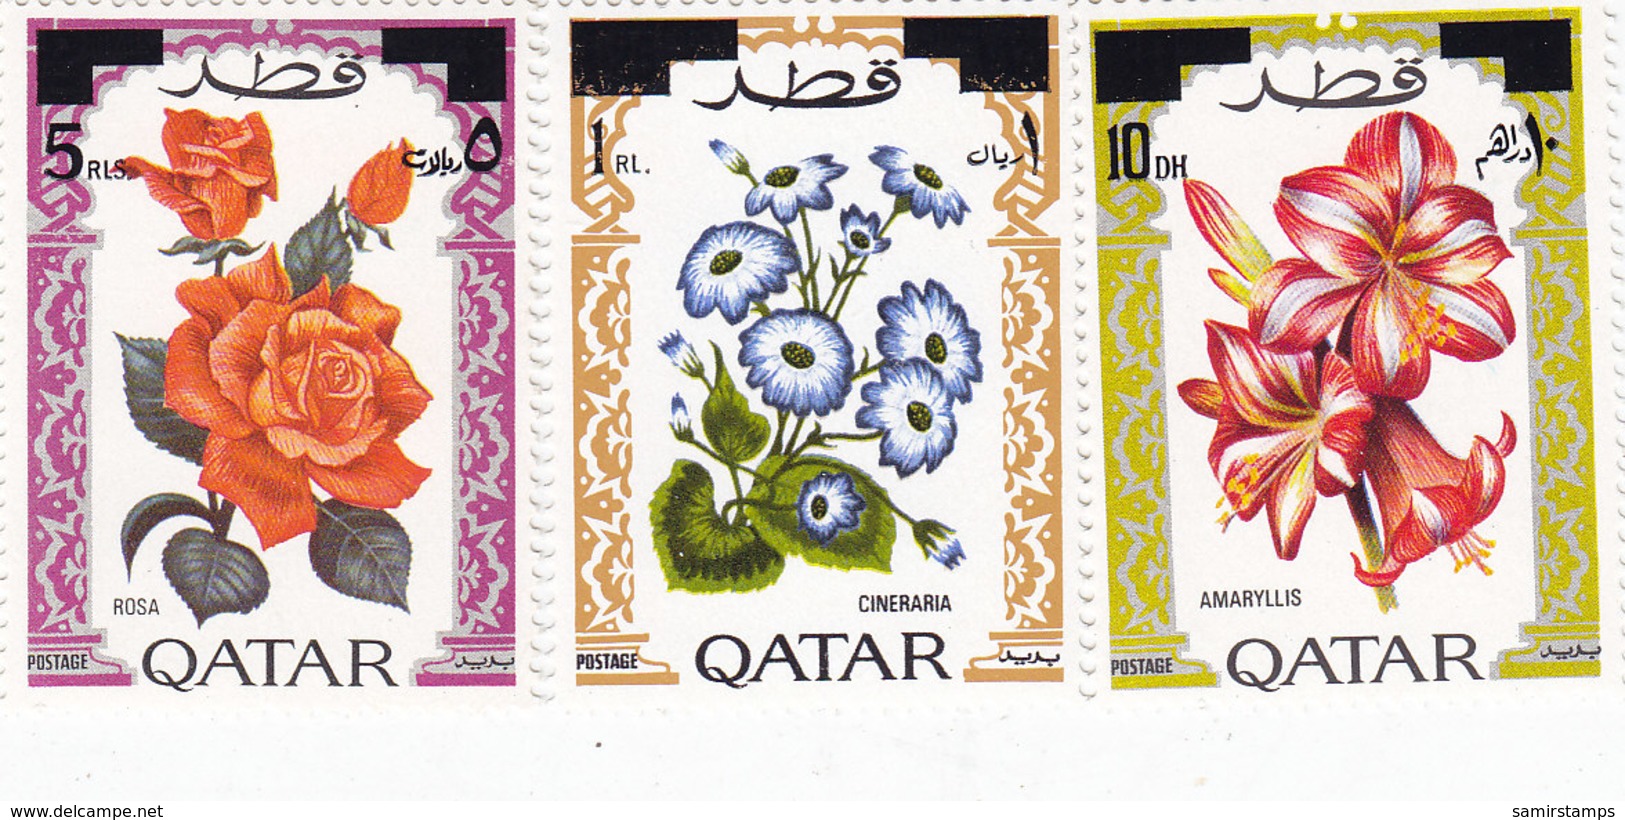 QATAR 1972 -Flowers Revalued Oveprinted 3 Stamps Rare Compl.set MNH- Cat,avlue 75 Euros- Red. Price - Skrill ONLY - Qatar